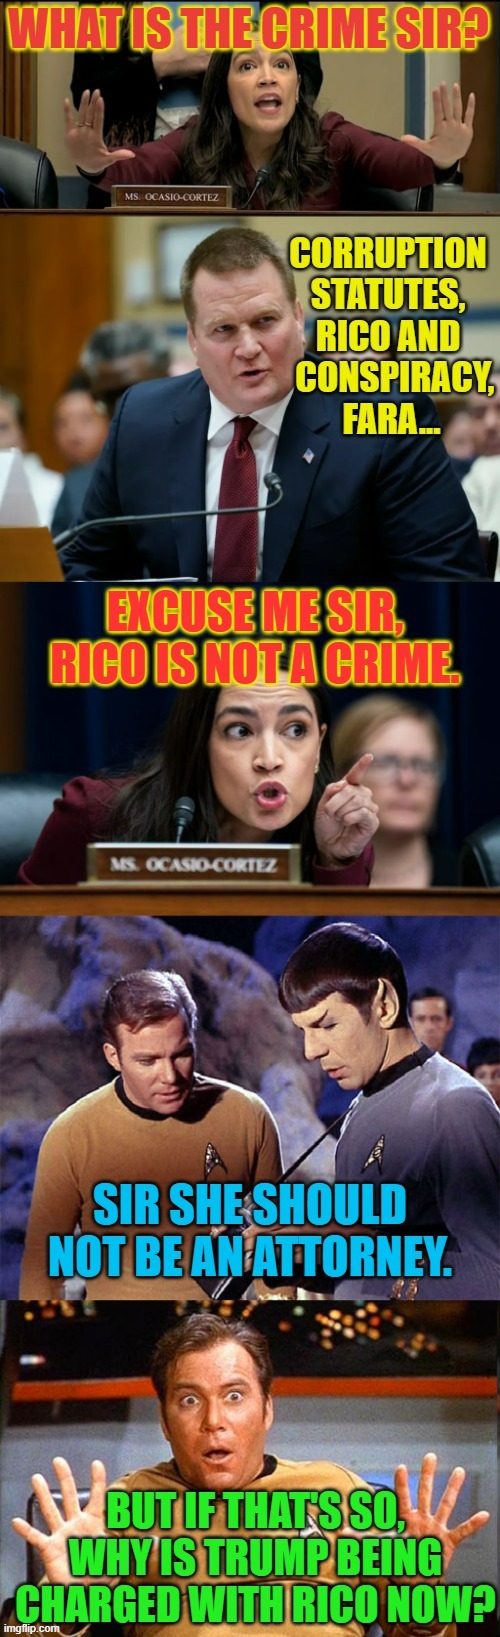 Double Standards And Dumbness | image tagged in memes,aoc,double standards,dumb,impeachment,star trek | made w/ Imgflip meme maker